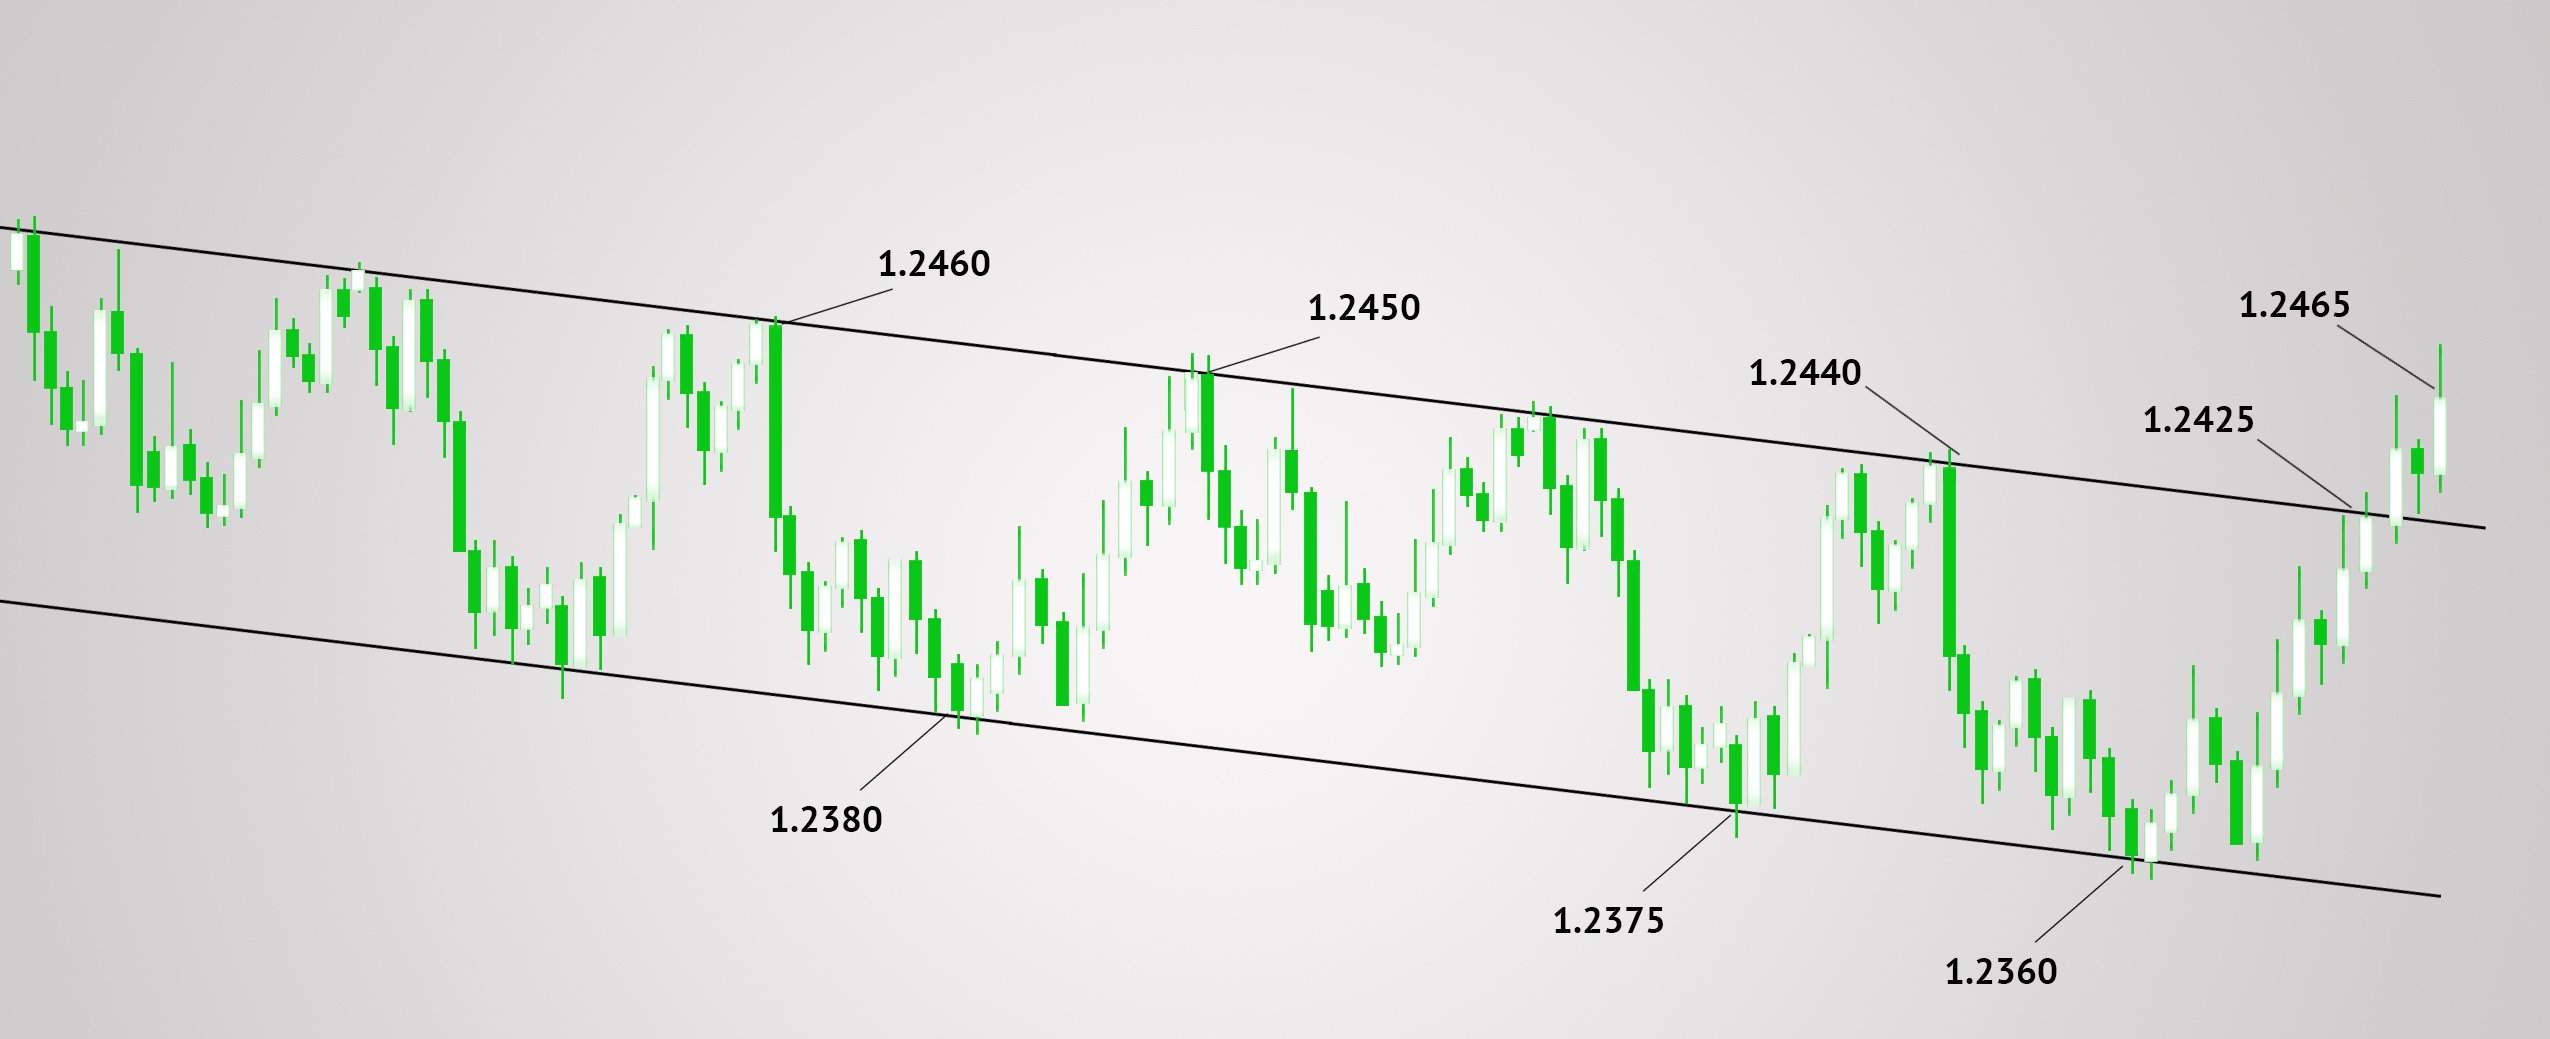 Trades within the price channel - Teletrade